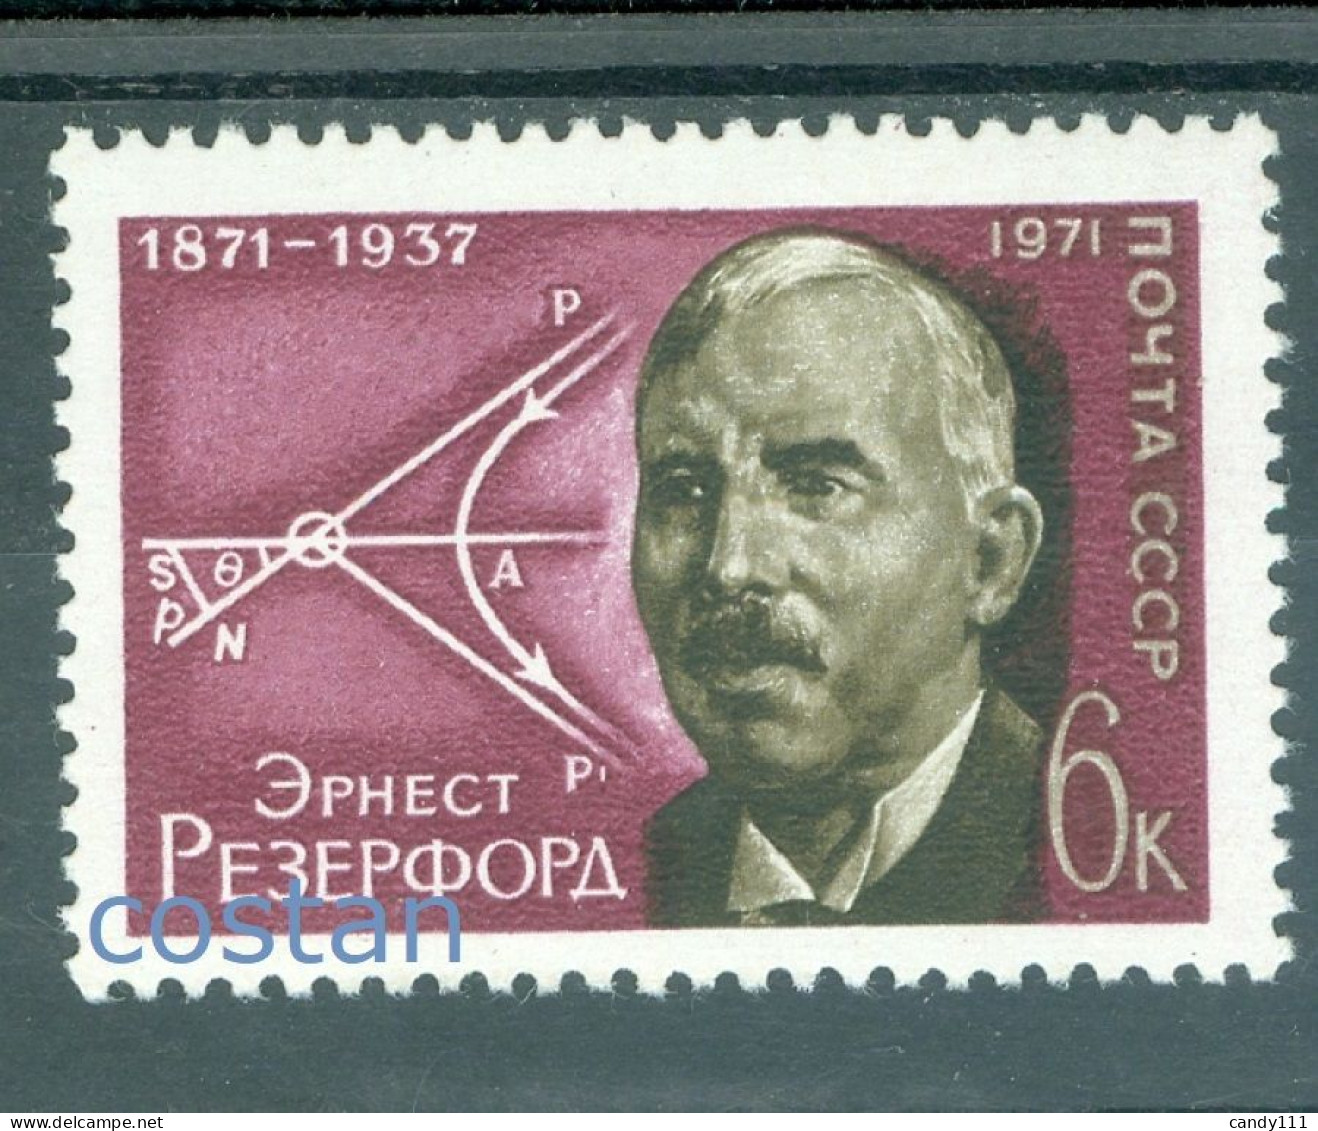 1971 Ernest Rutherford,physicist,Nobel Prize,Nuclear Physics,Russia,3921,MNH - Unused Stamps